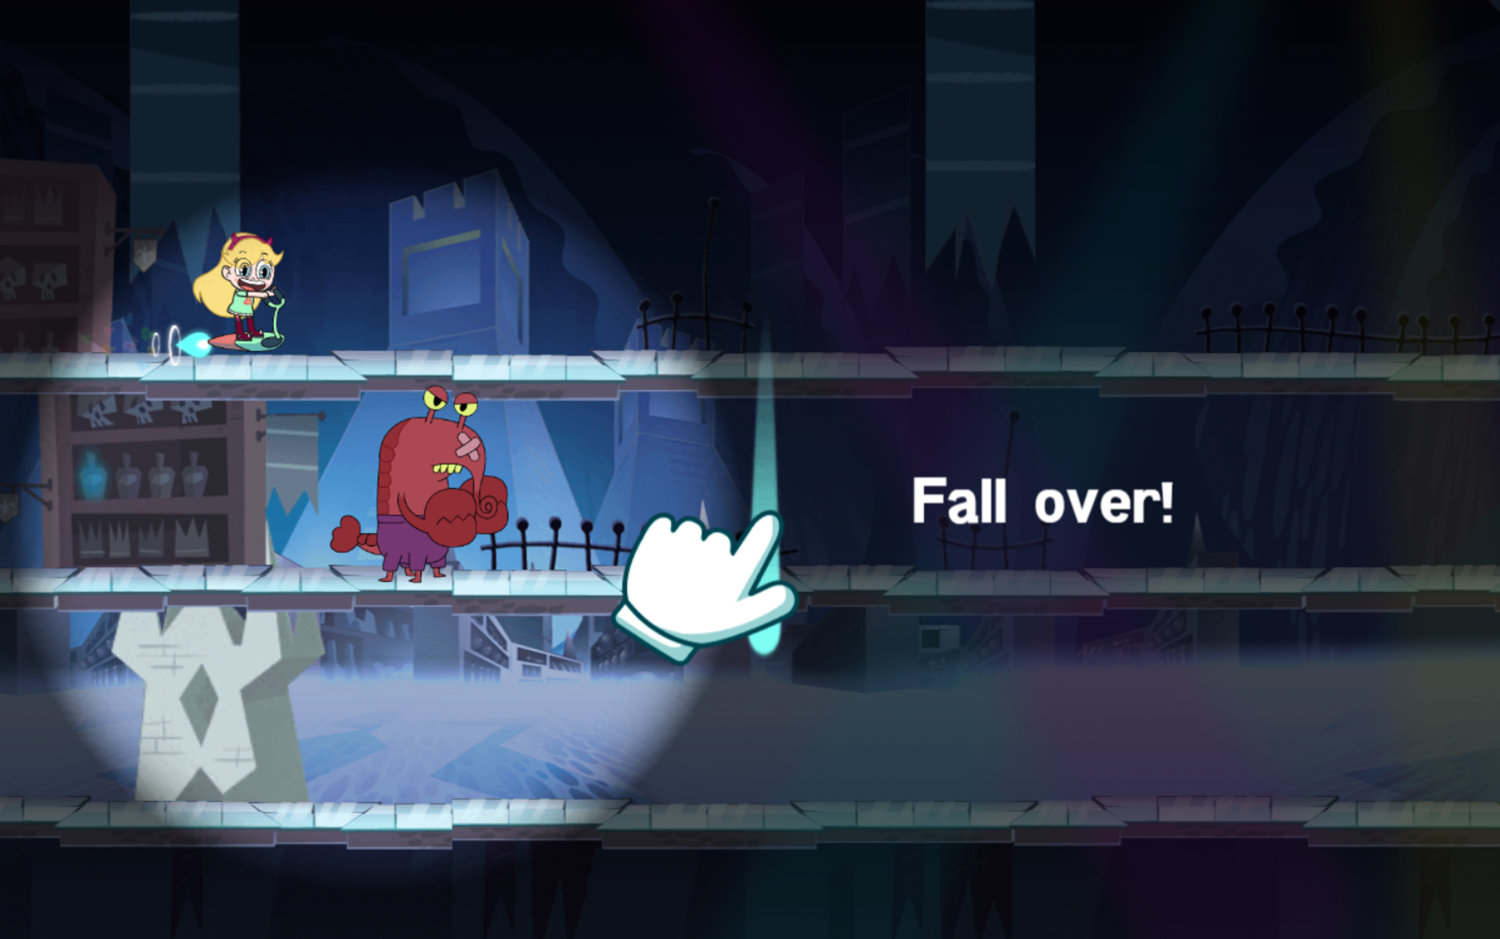 Star vs the Forces of Evil Quest Buy Rush Game How To Fall Over Screenshot.